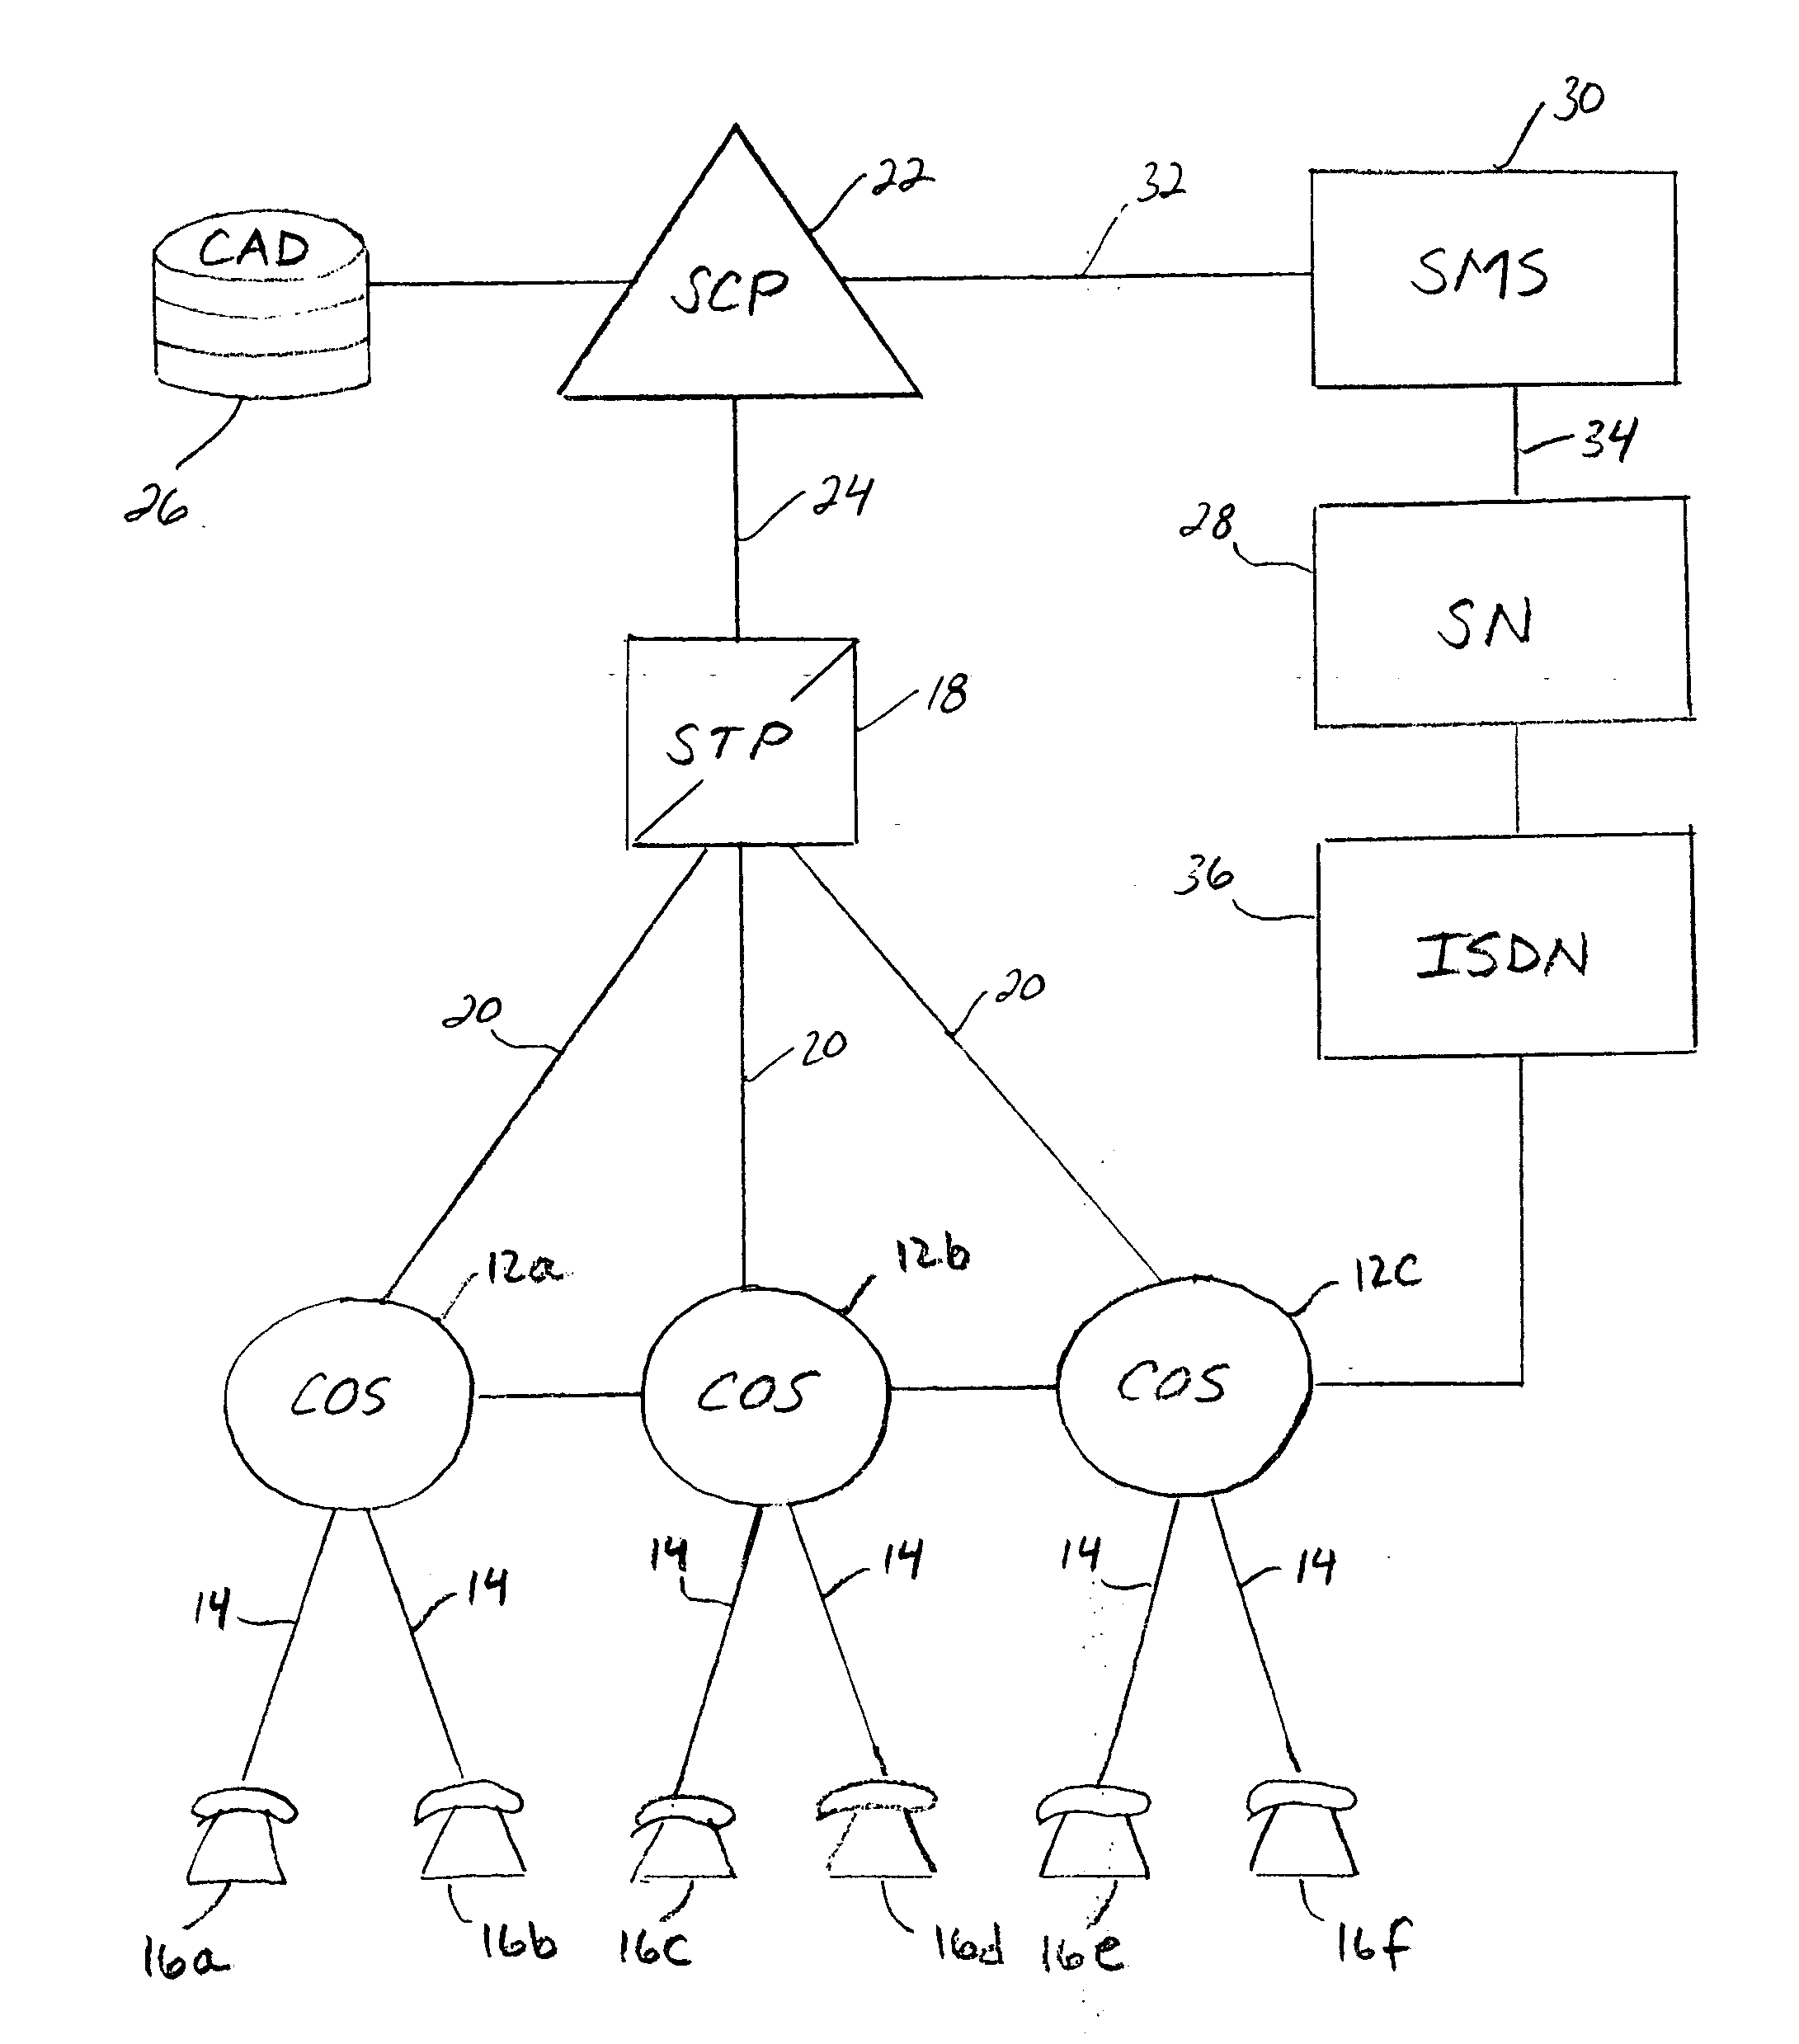 Method and system for selectable call termination attempt notification and blocking